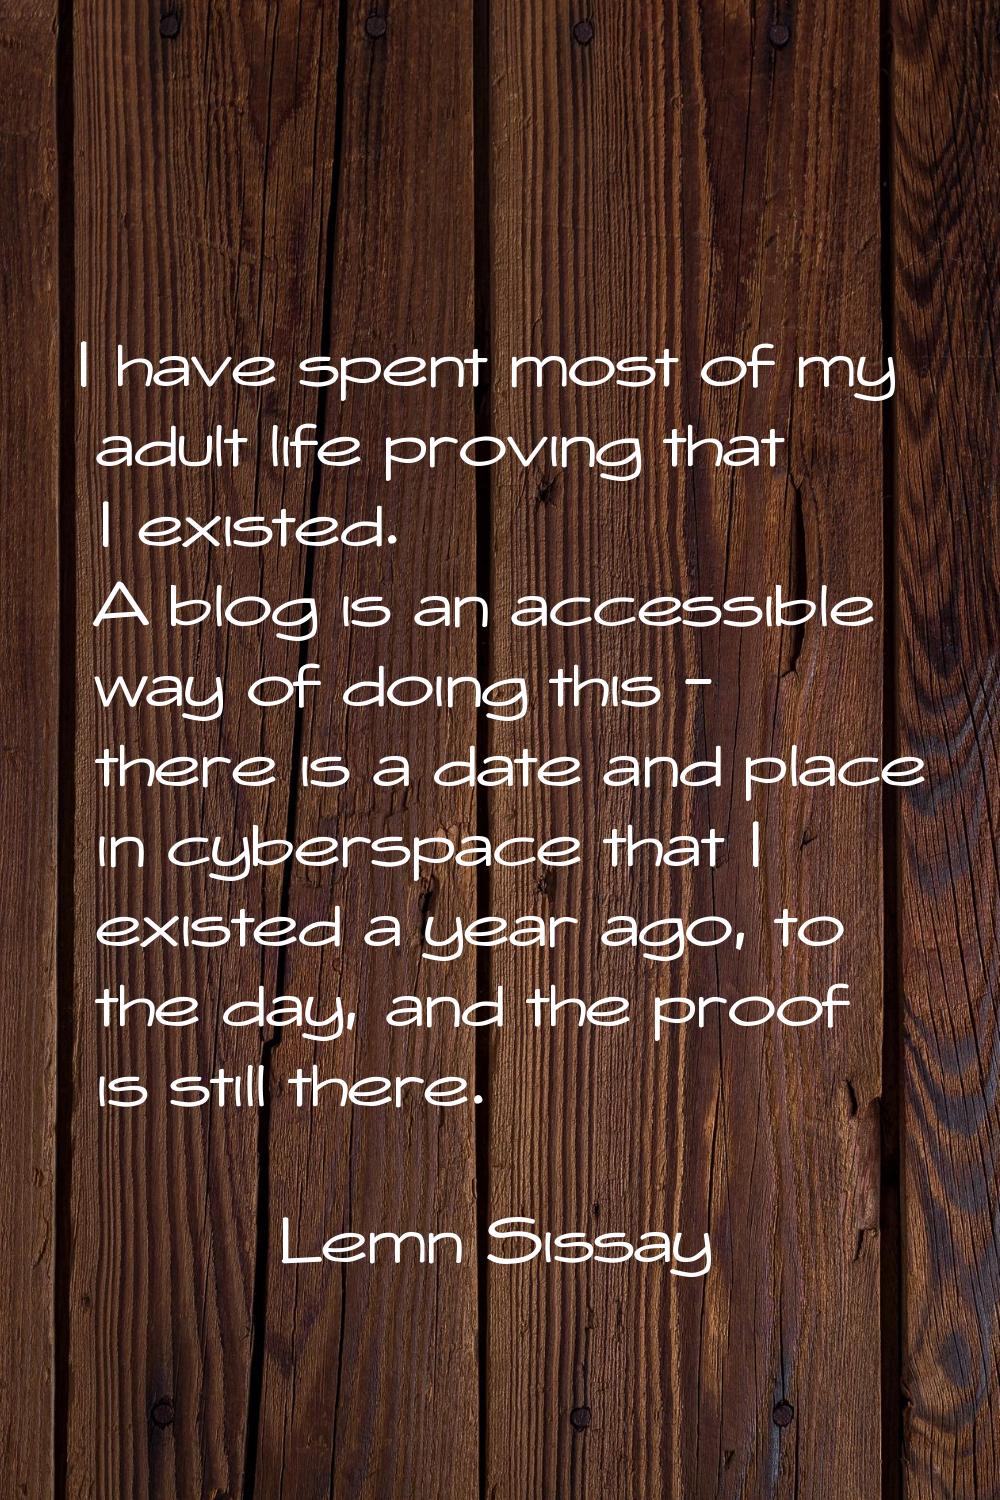 I have spent most of my adult life proving that I existed. A blog is an accessible way of doing thi